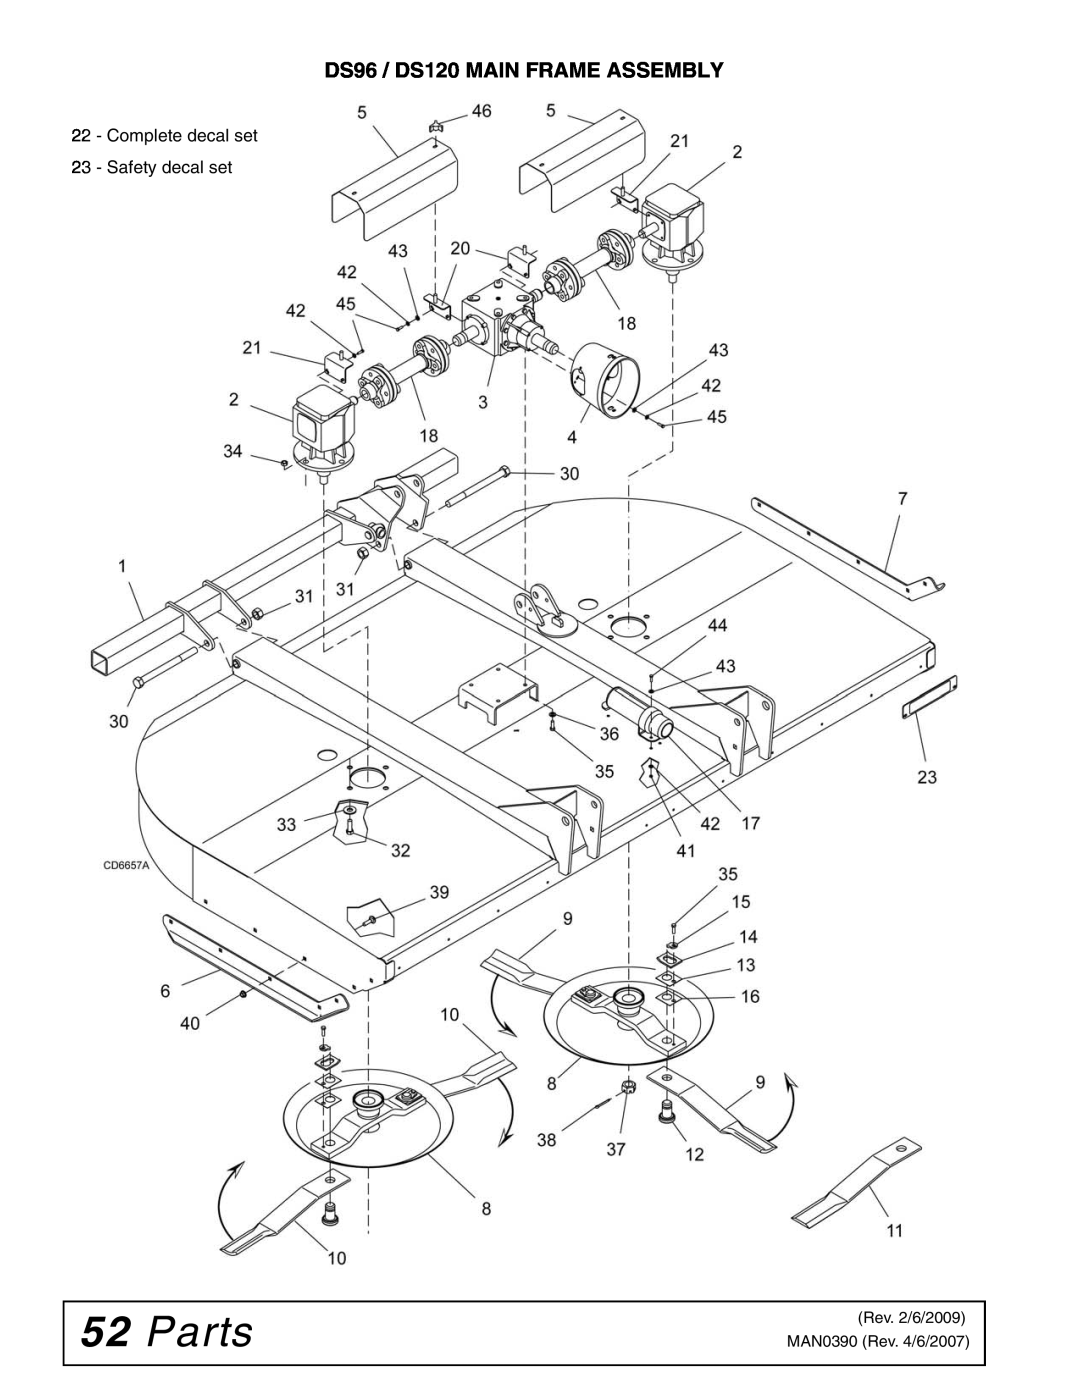 Woods Equipment manual Parts, DS96 / DS120 MAIN FRAME ASSEMBLY 